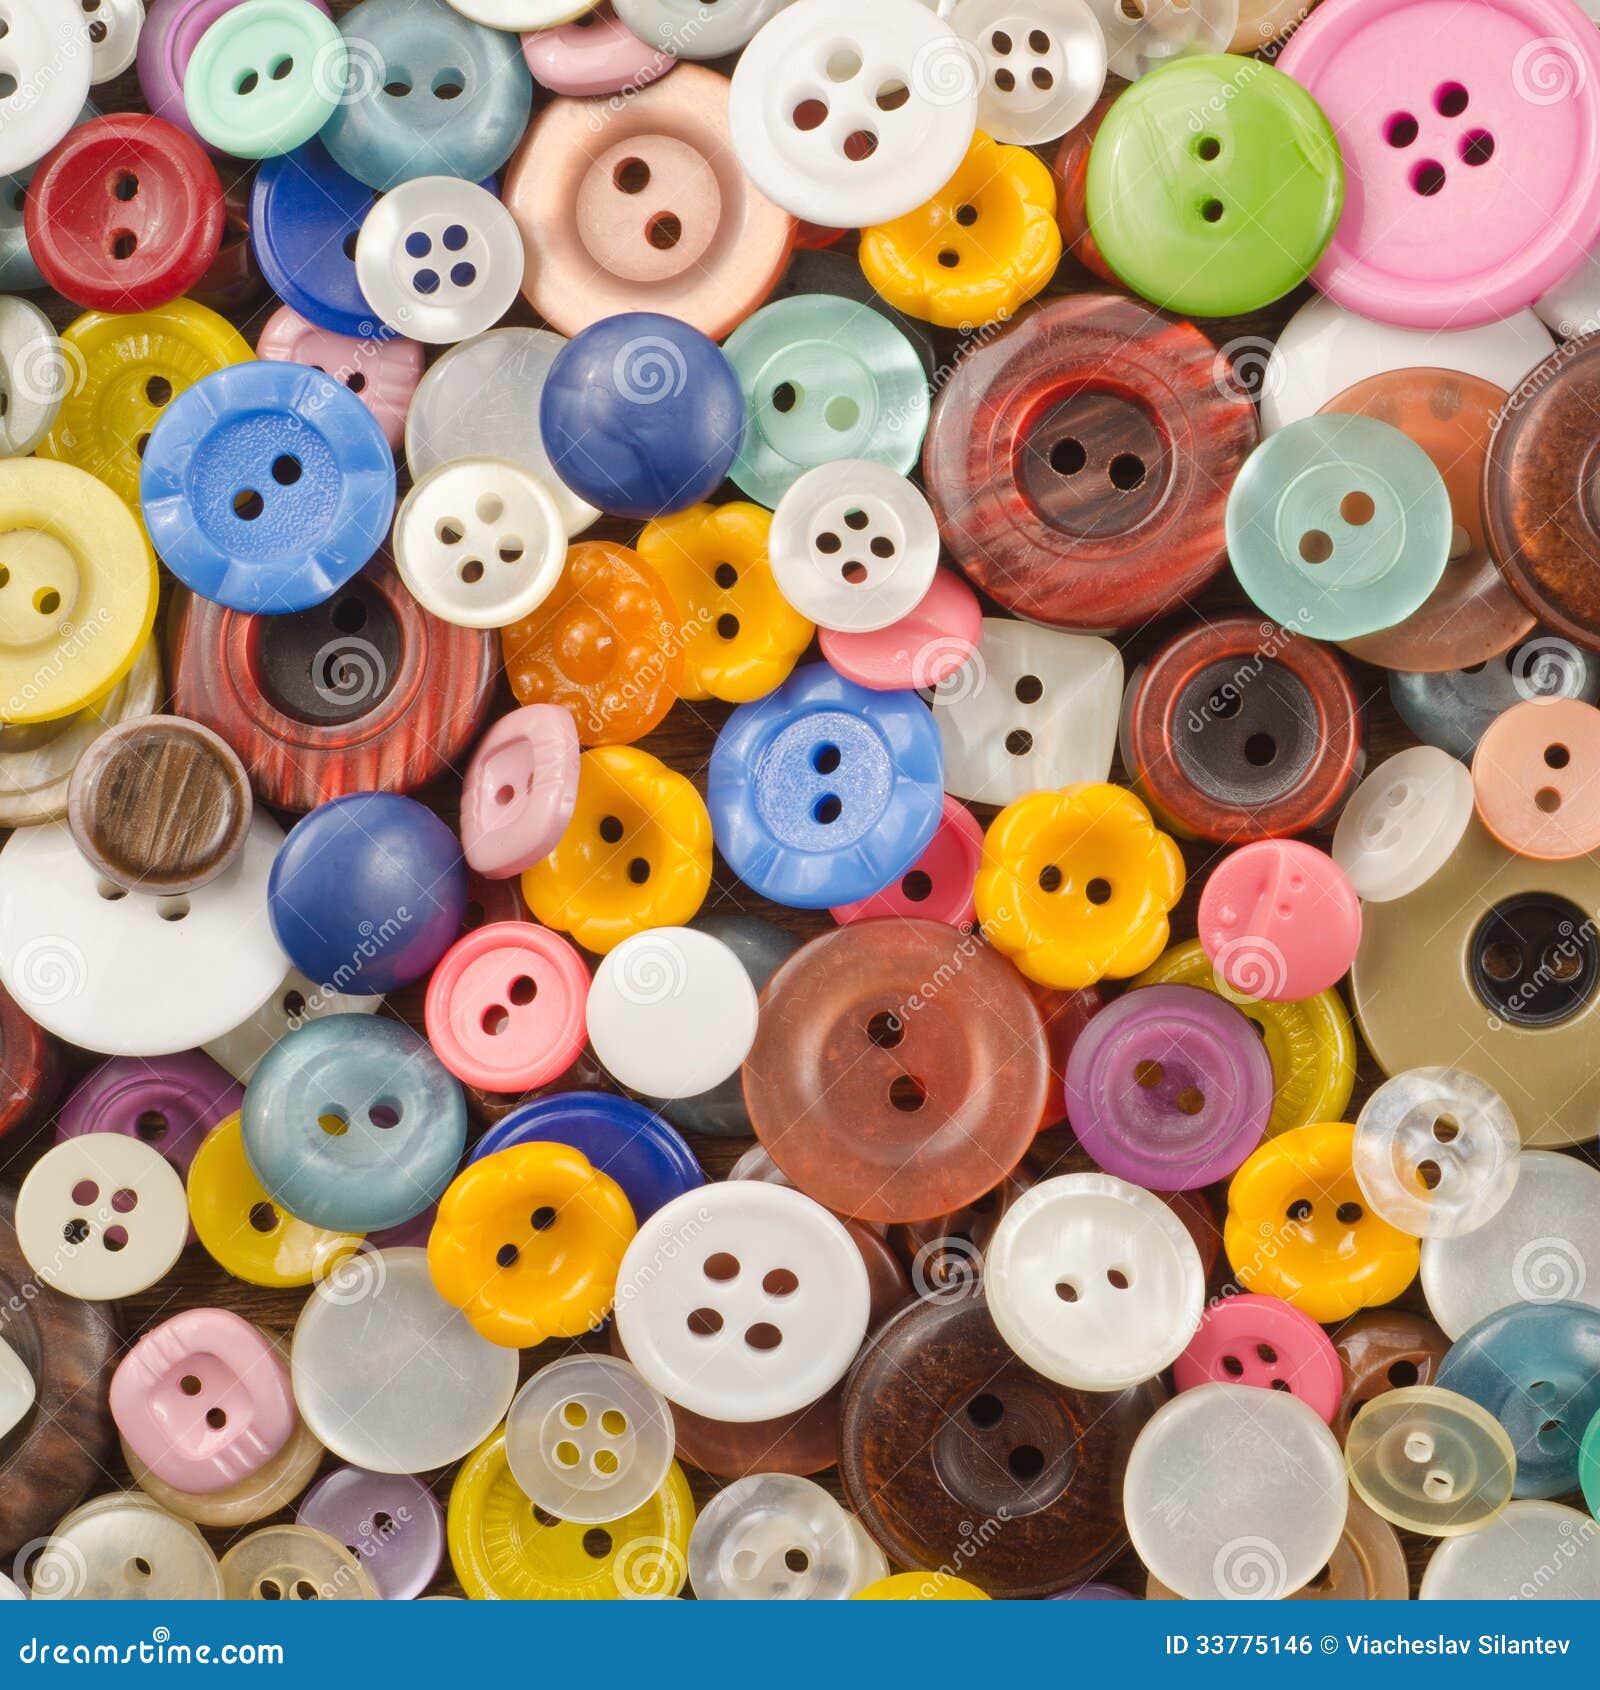 20,974 Colorful Buttons Stock Photos - Free & Royalty-Free Stock Photos  from Dreamstime